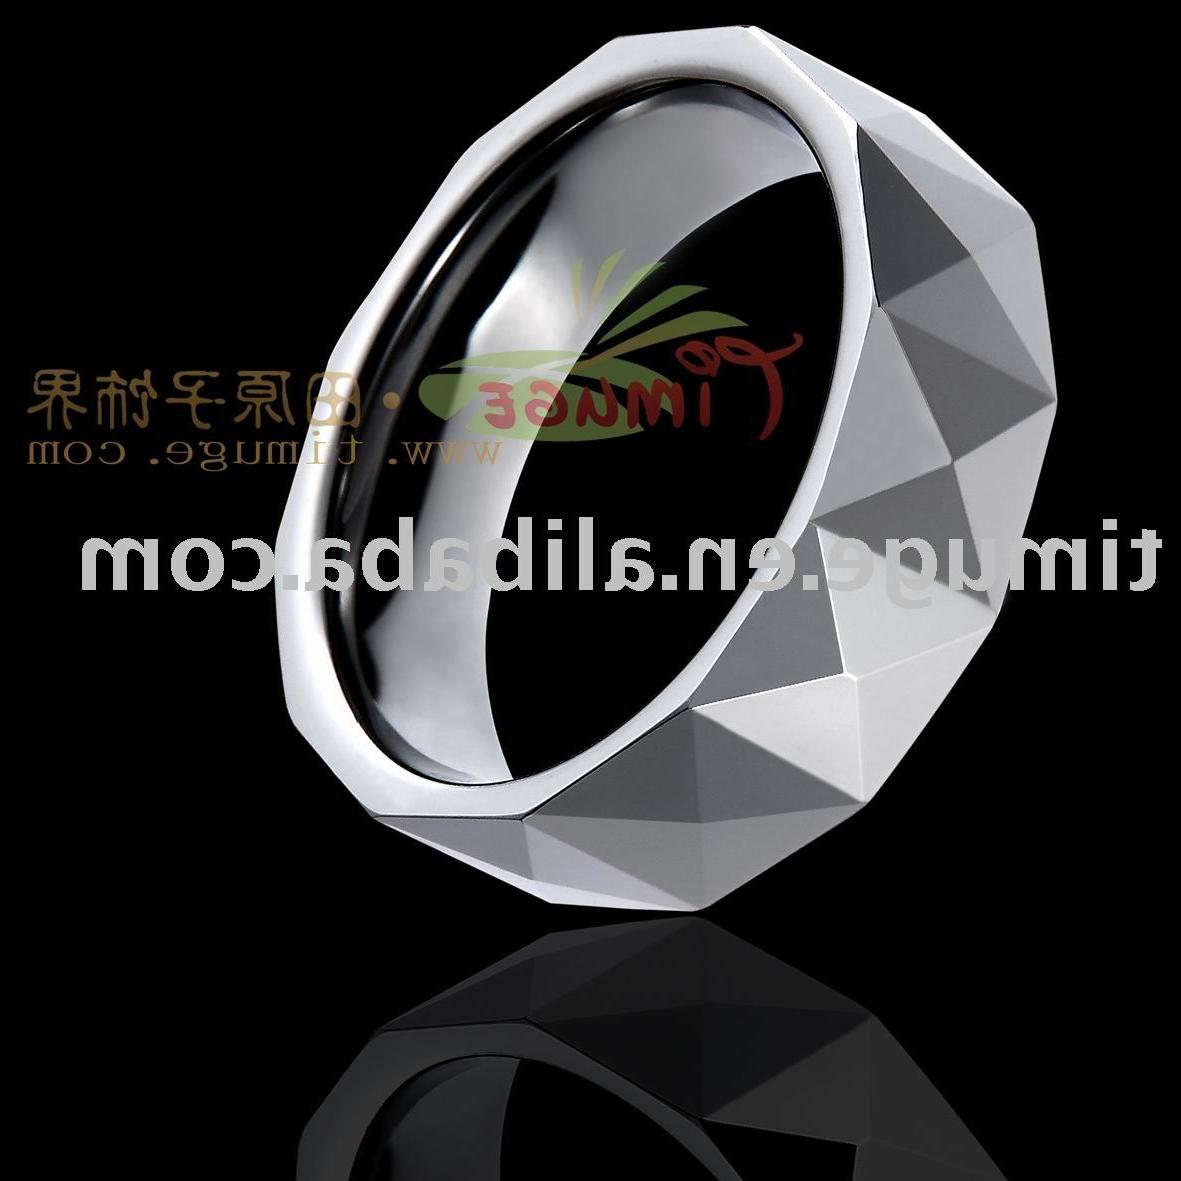 Tungsten Rings, fingle rings,wedding rings. Inquire now